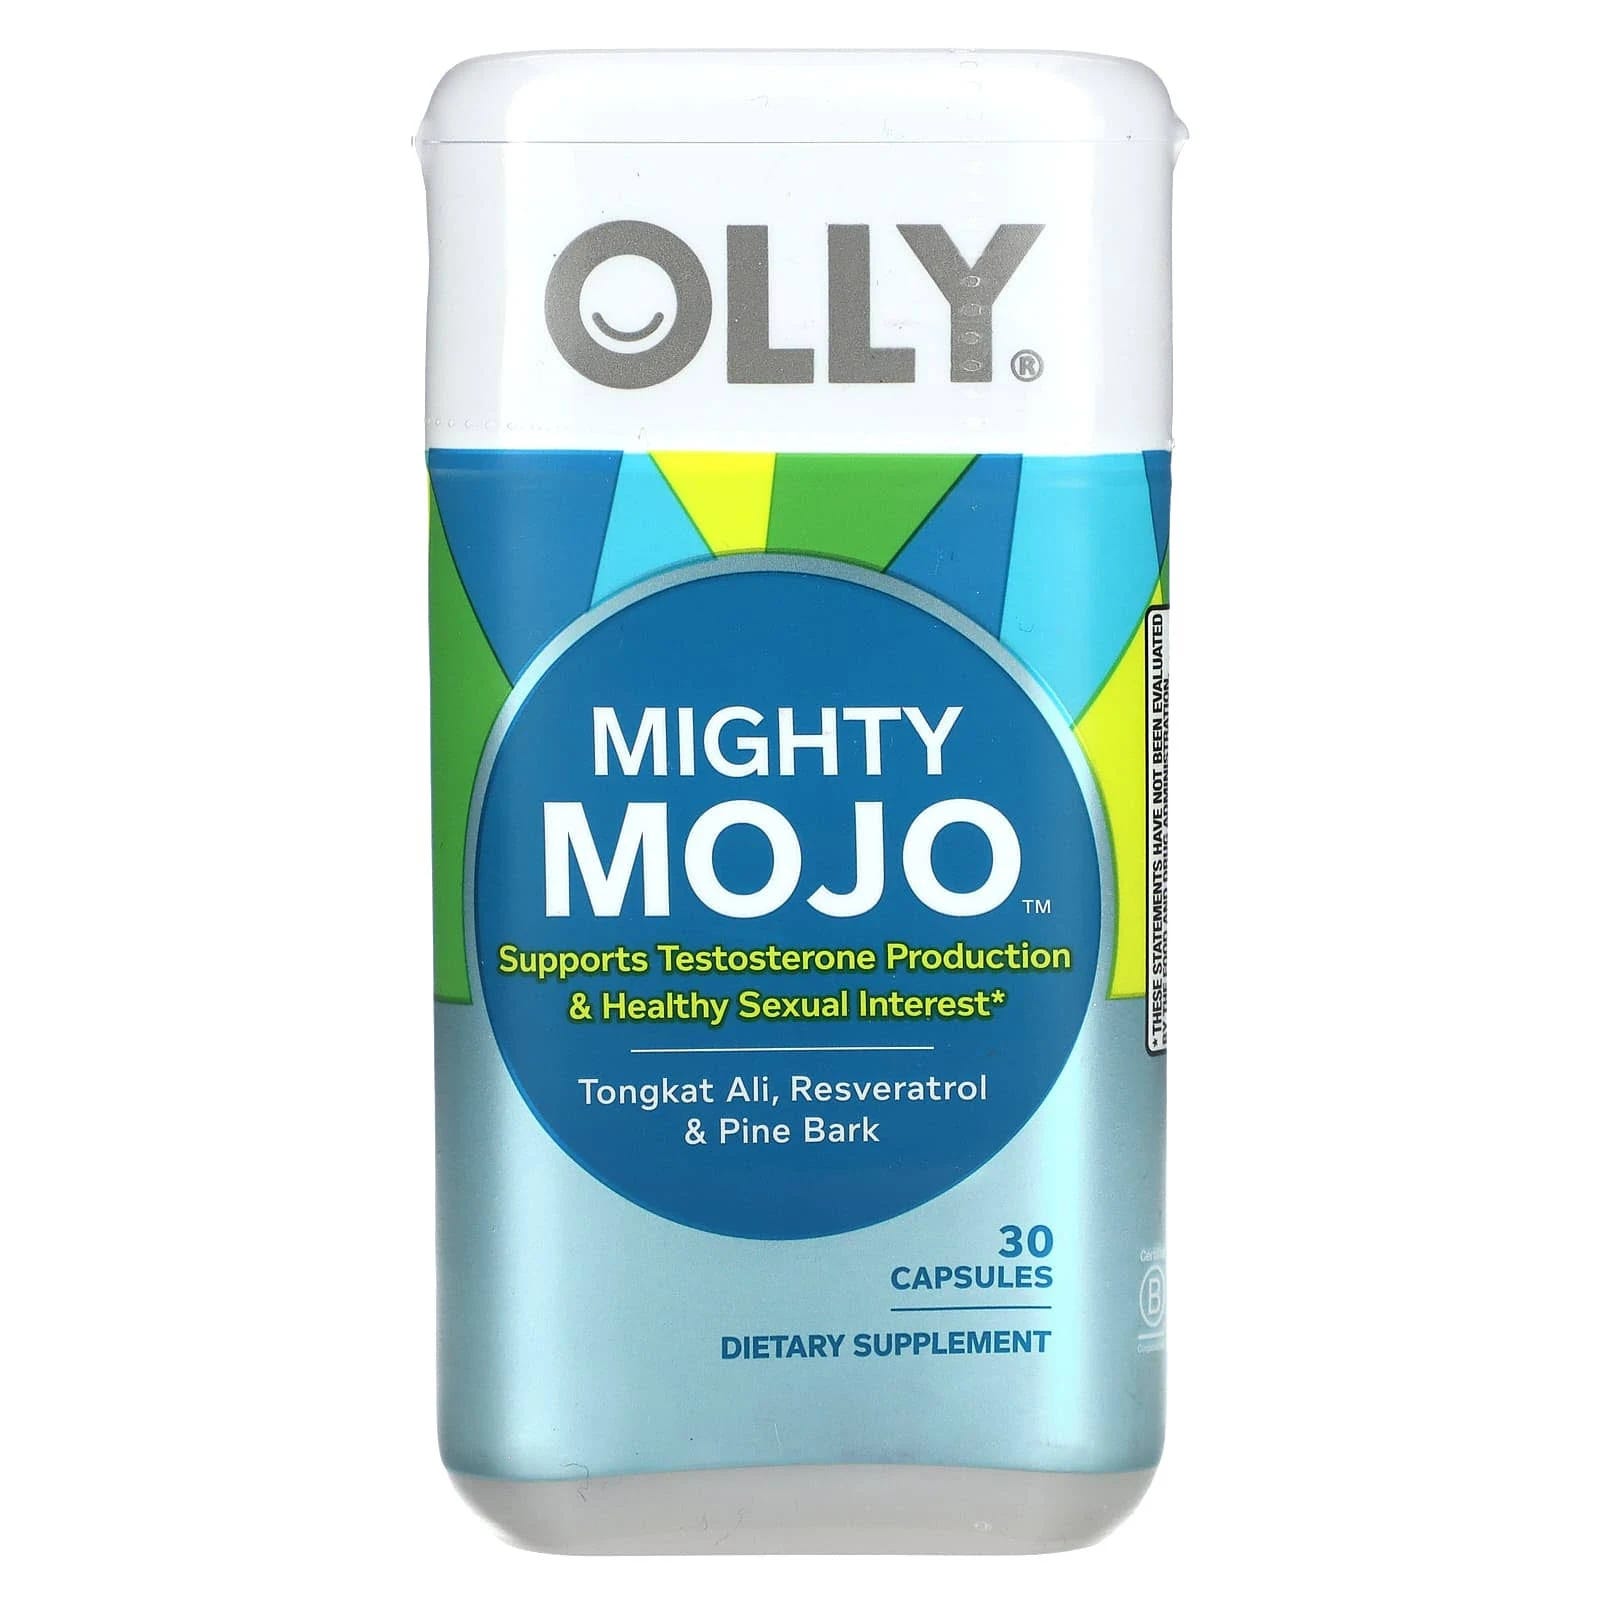 OLLY Mighty Mojo: Lithium Orotate Supplement | Image